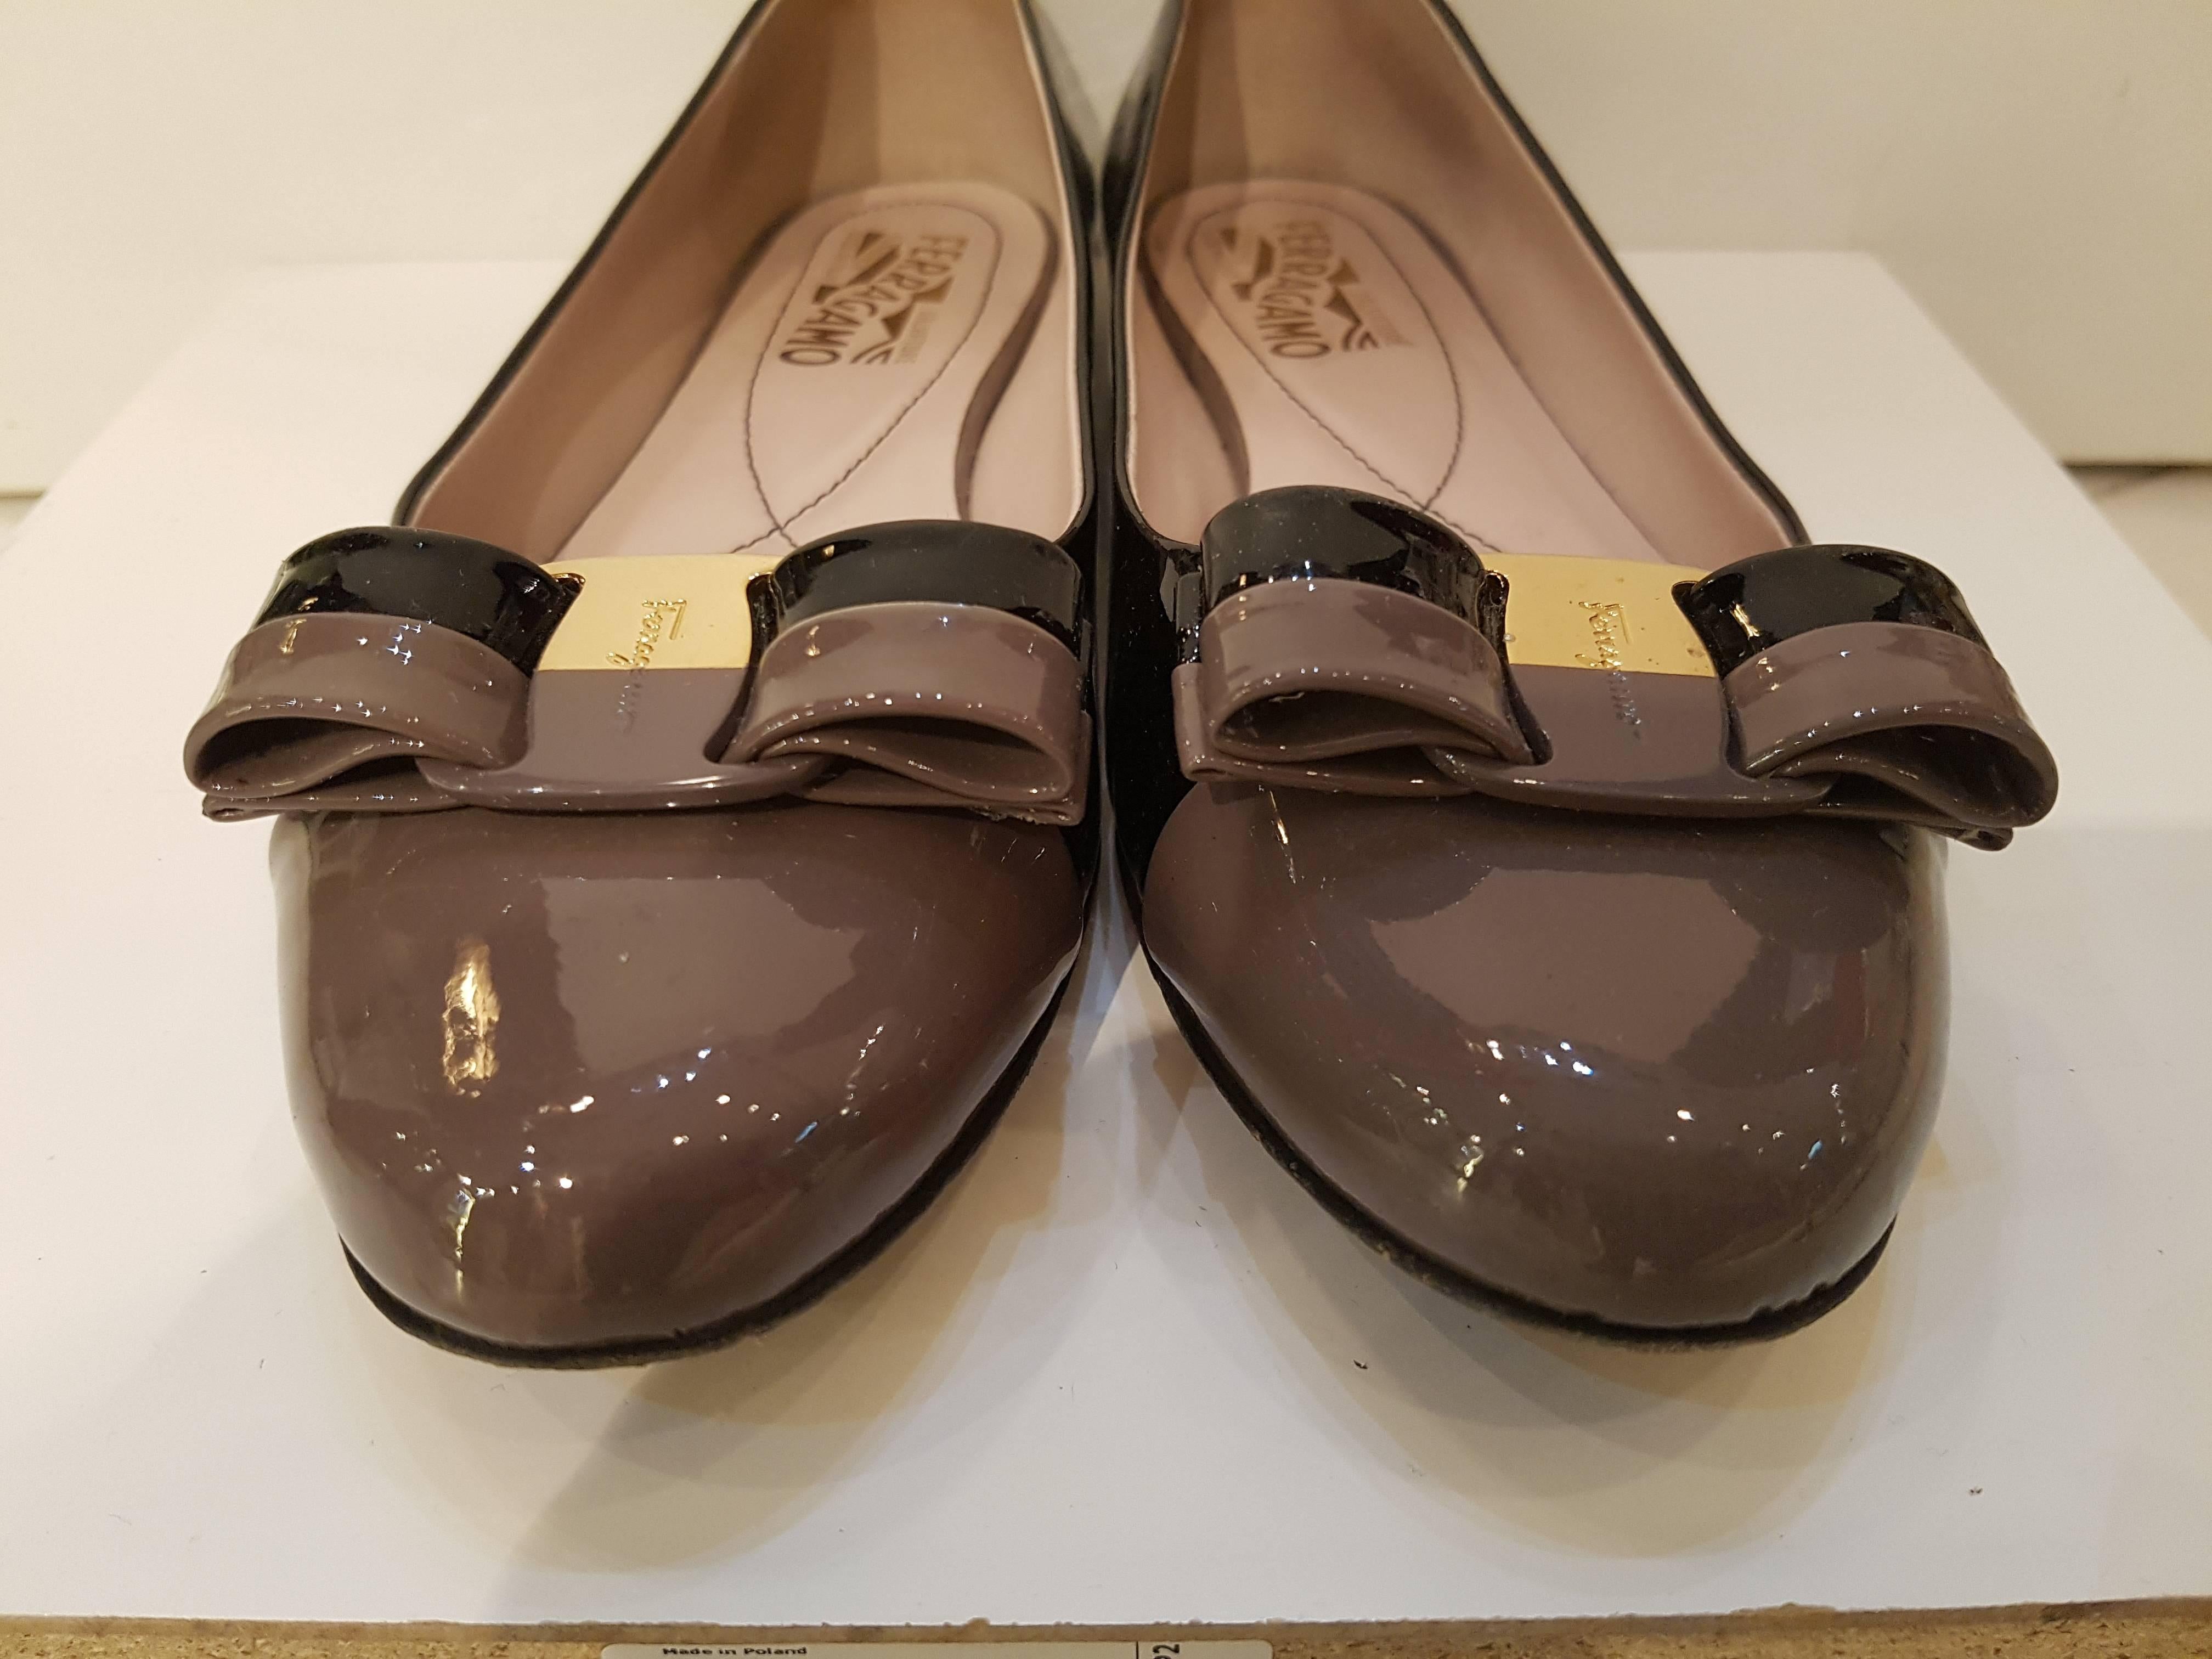 Salvatore Ferragamo black and taupe Varnish leather ballerina
totally made in italy in italian size range 37